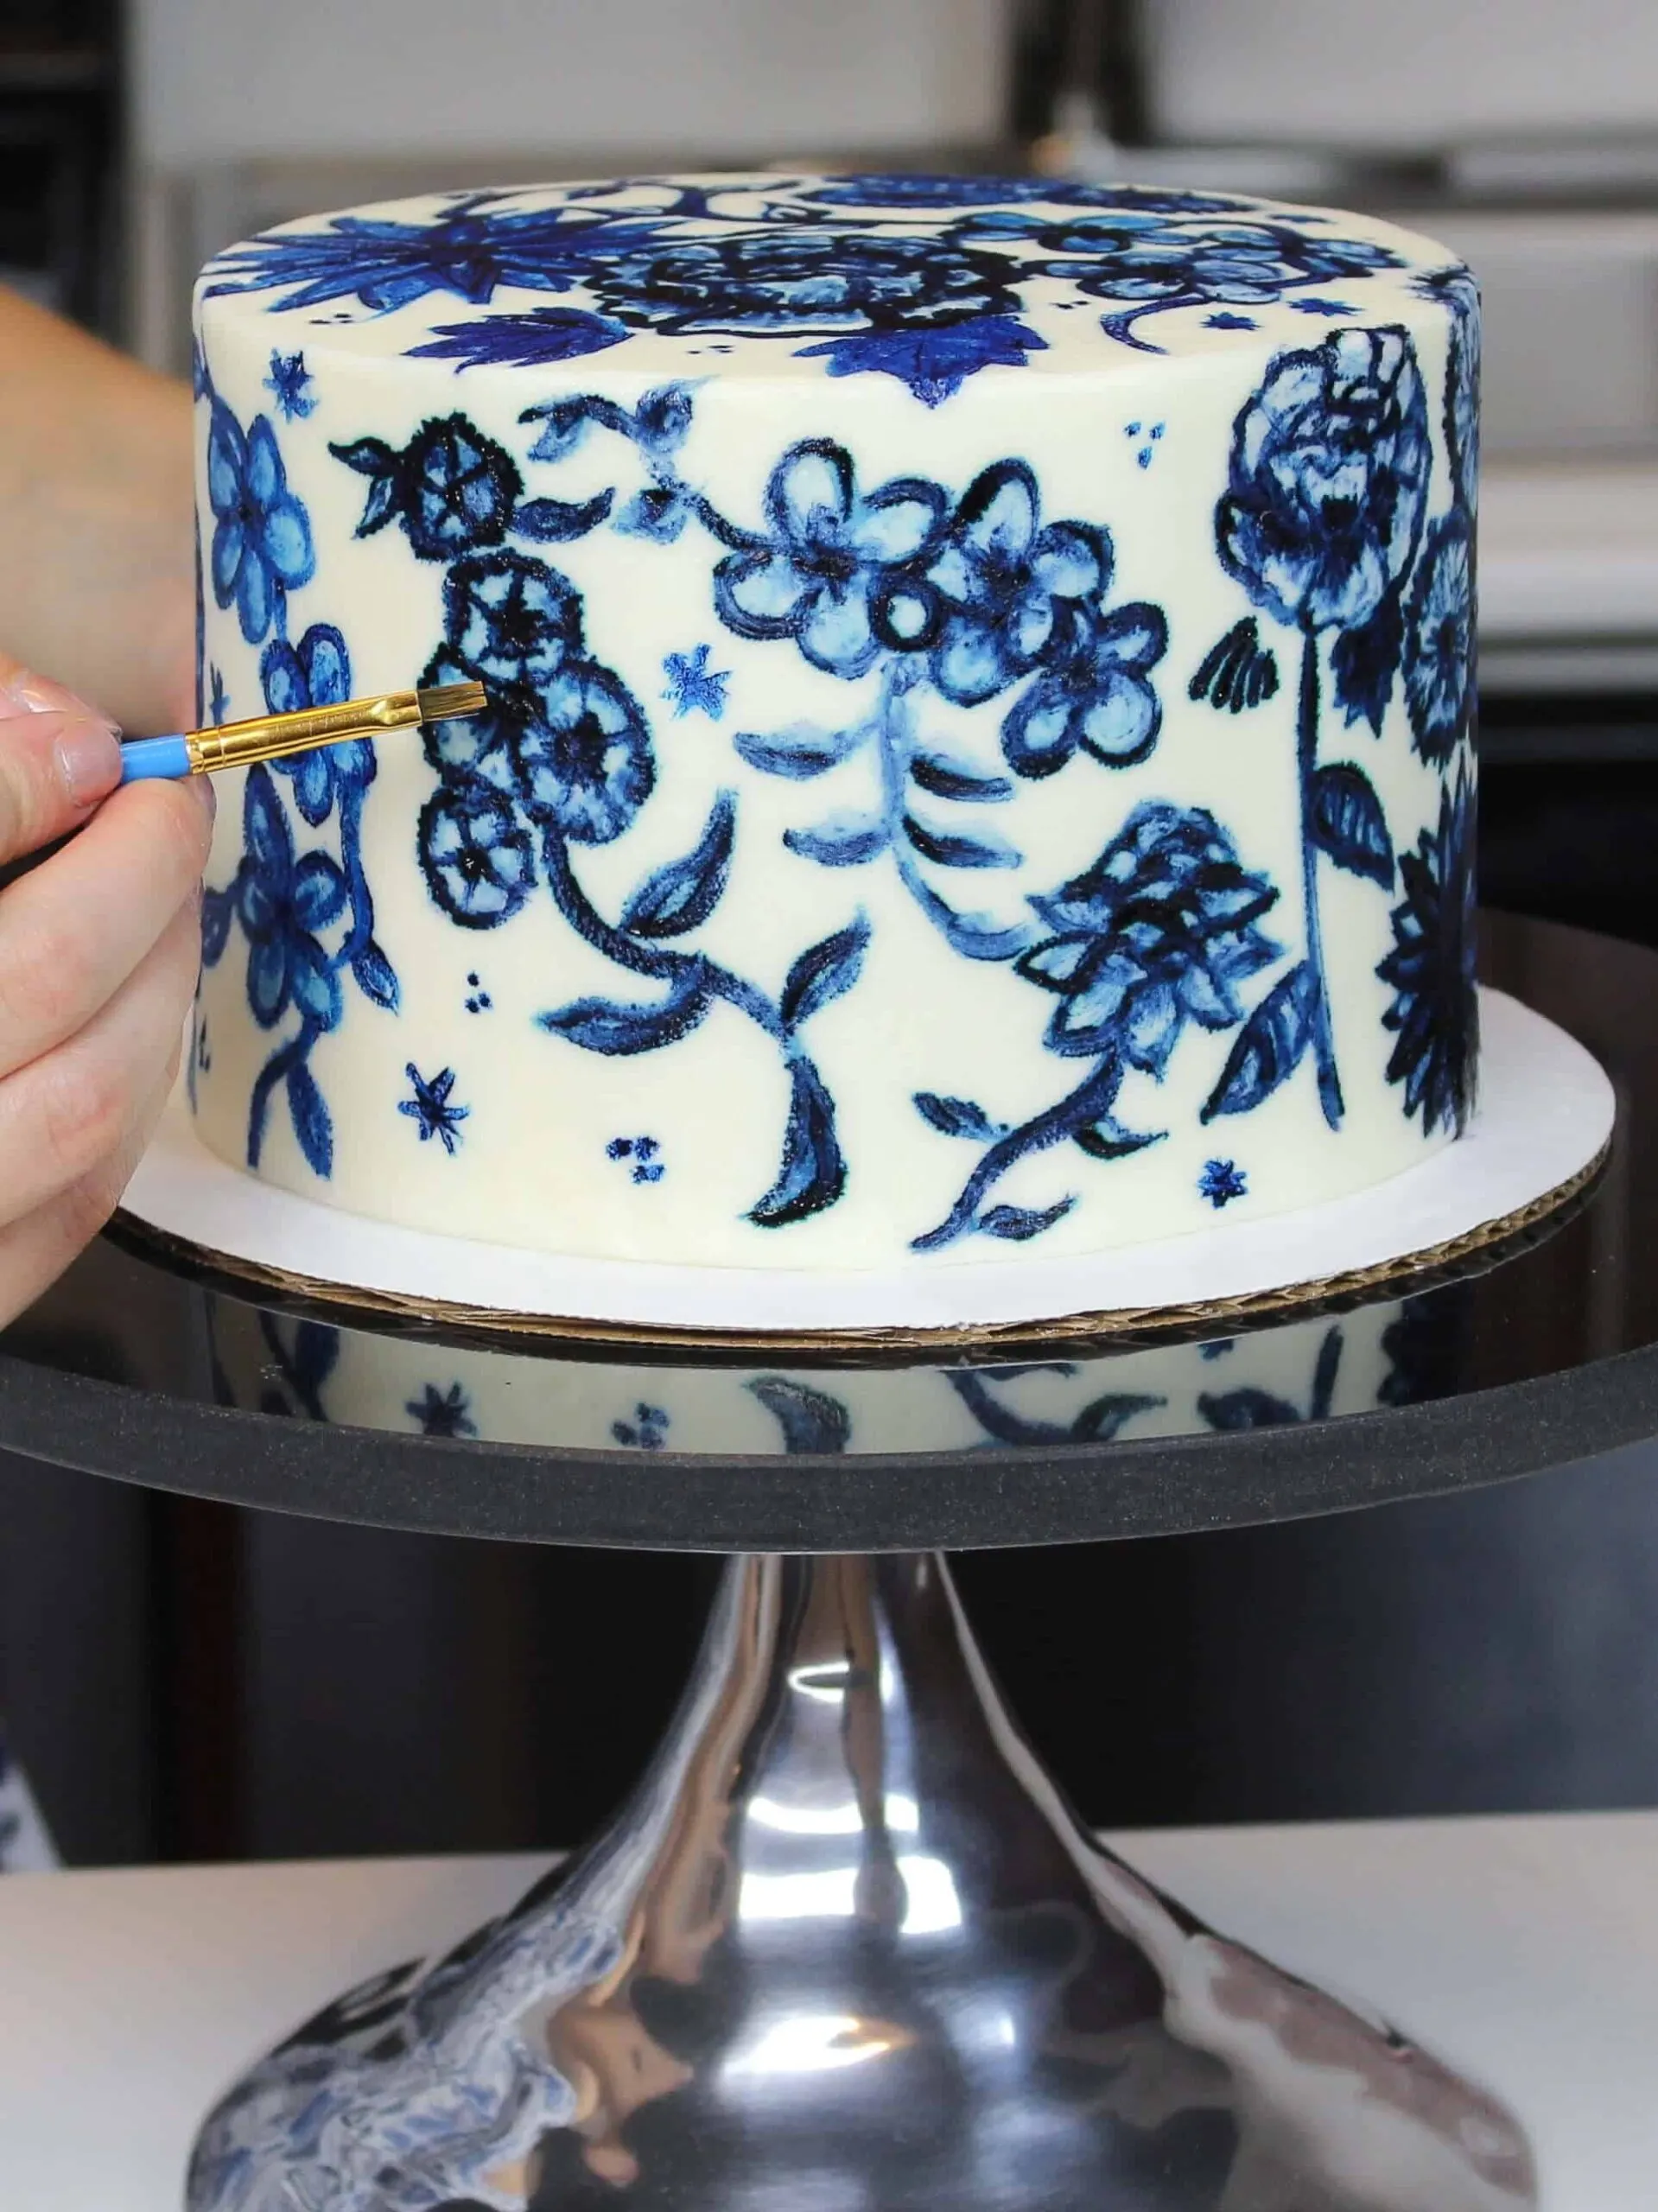 image of a buttercream cake being painted with edible paint made with gel food coloring and vodka
